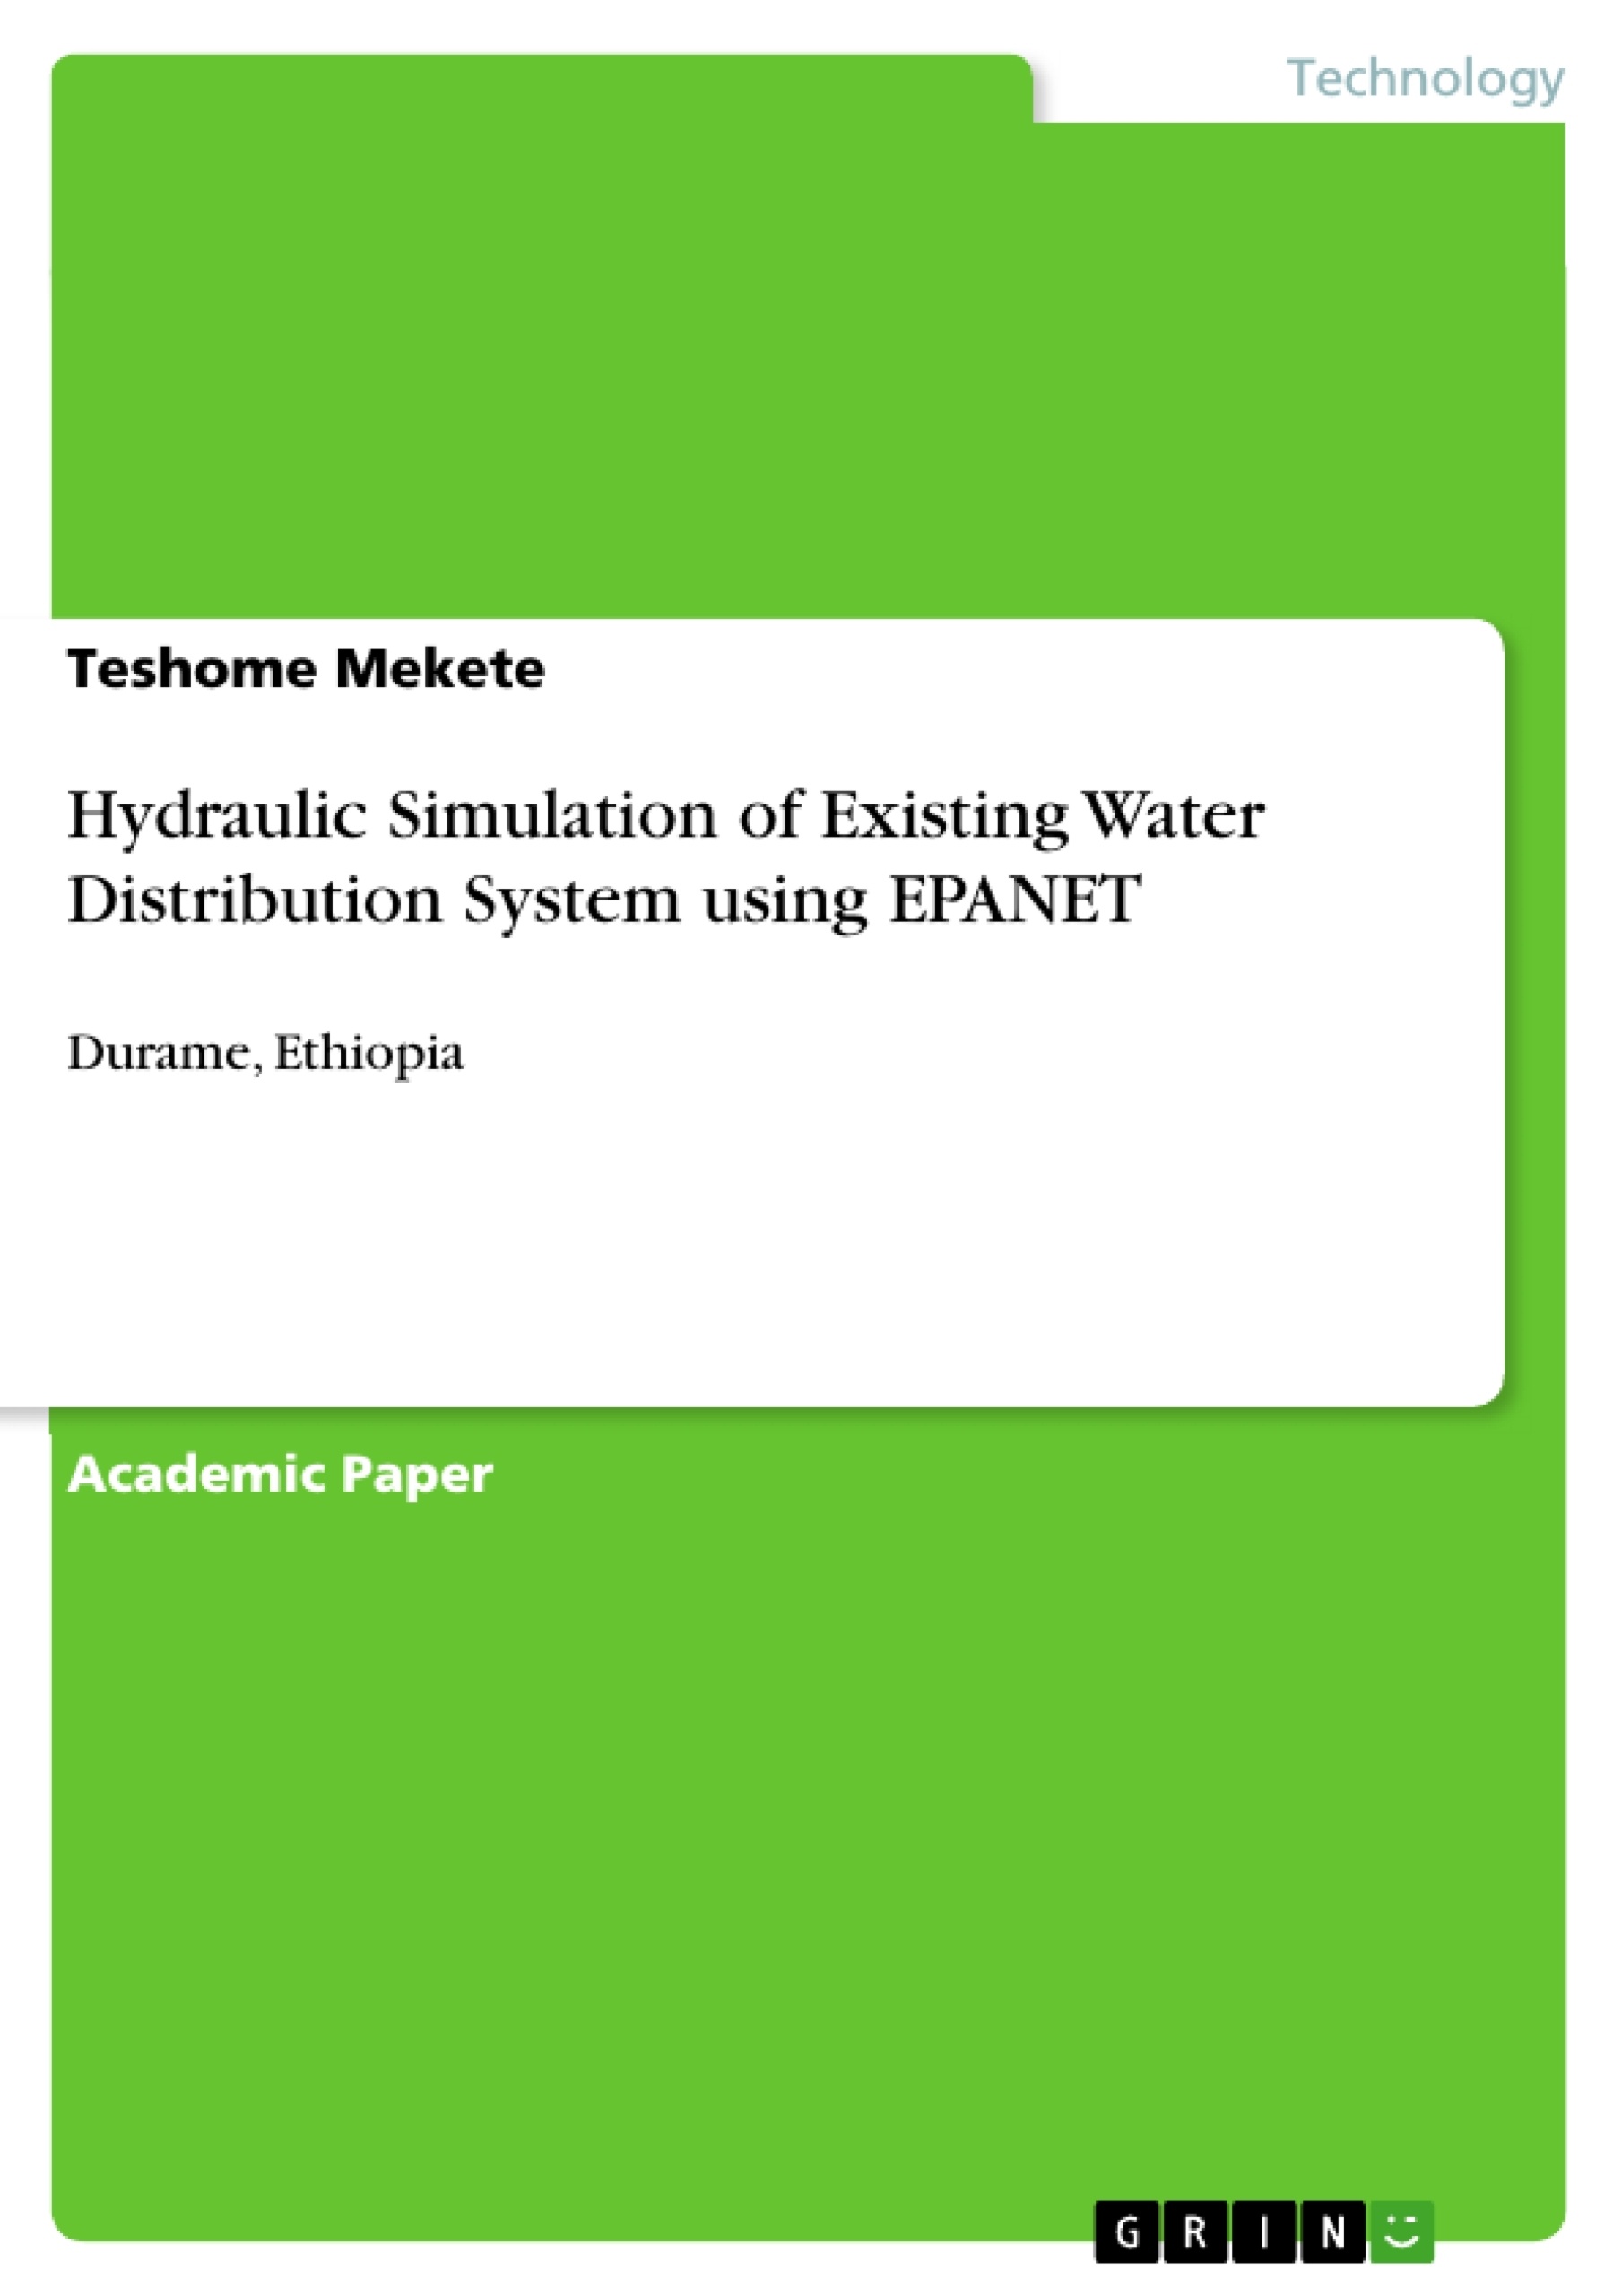 Titre: Hydraulic Simulation of Existing Water Distribution System using EPANET